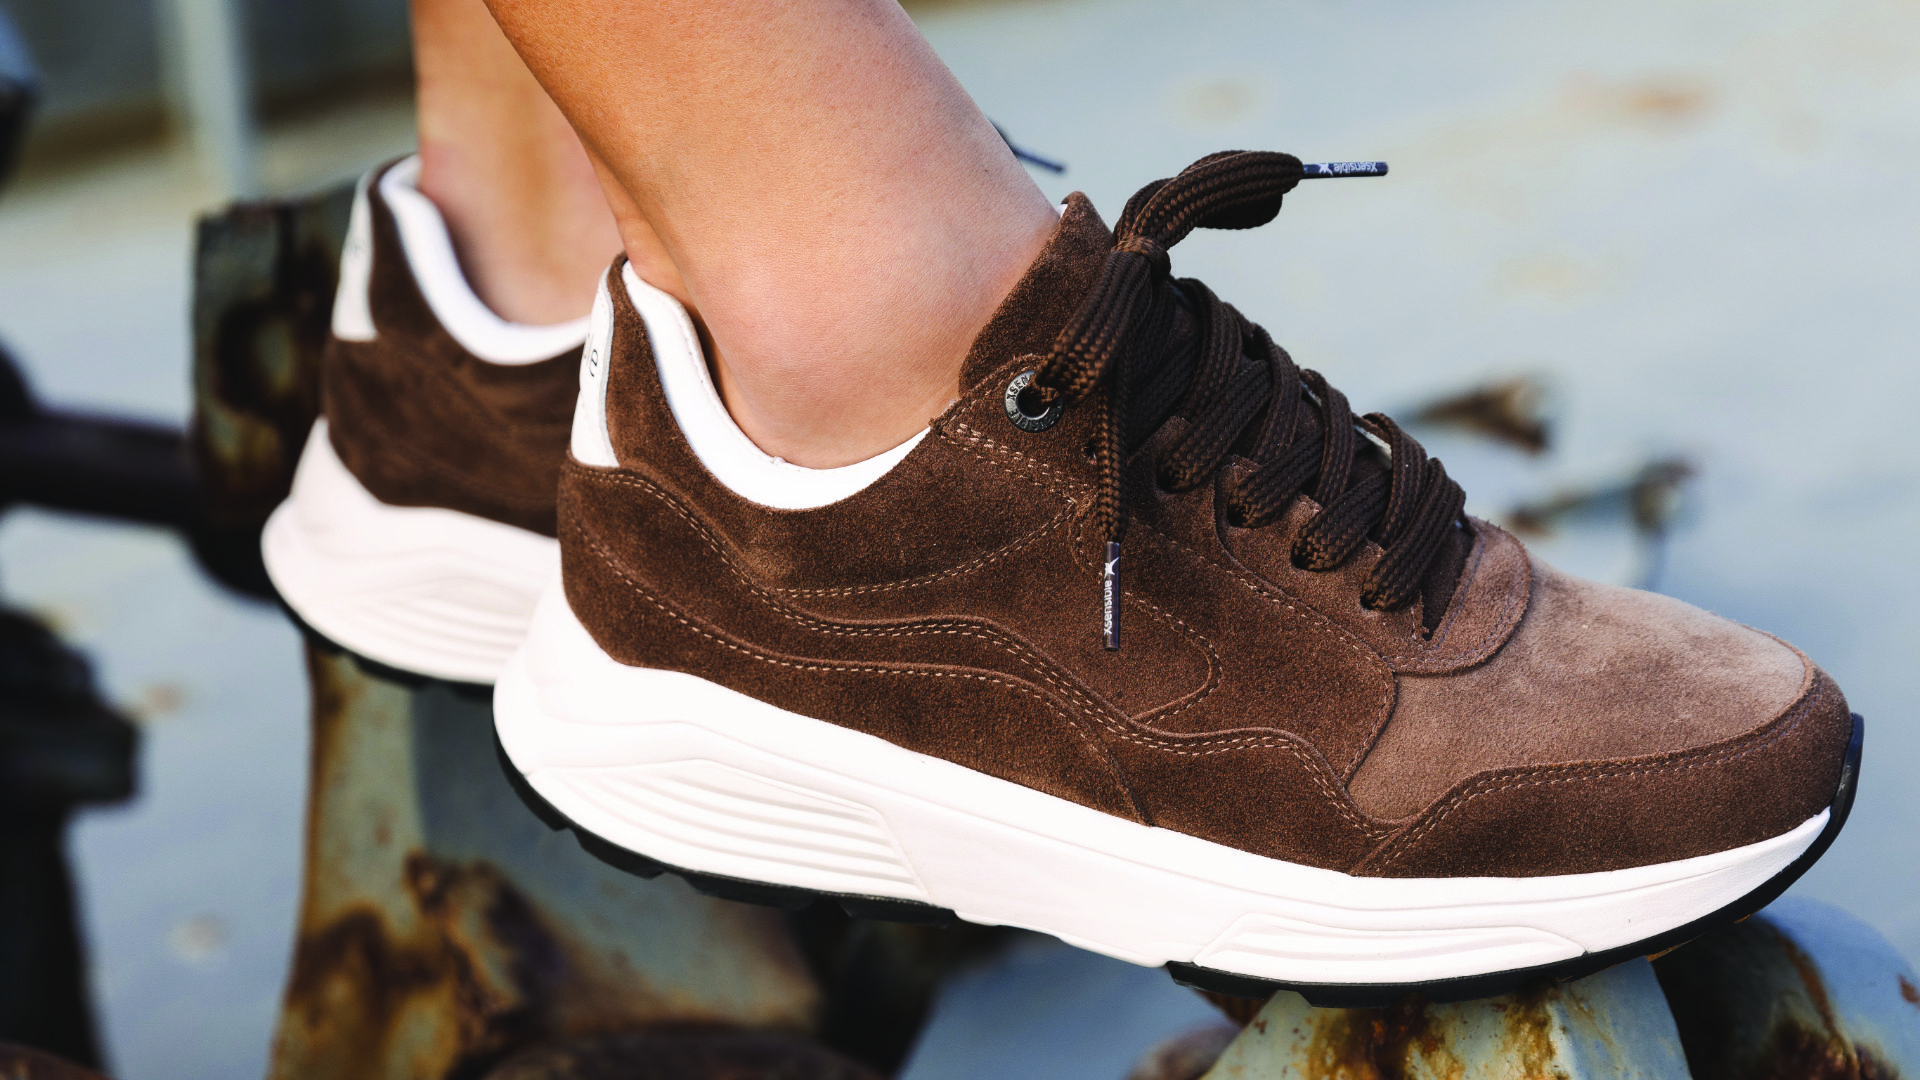 A pair of Xsensible Golden Gates shoes in brown suede, with a close-up view showcasing the unique stretch upper and comfortable fit for hammer toes.